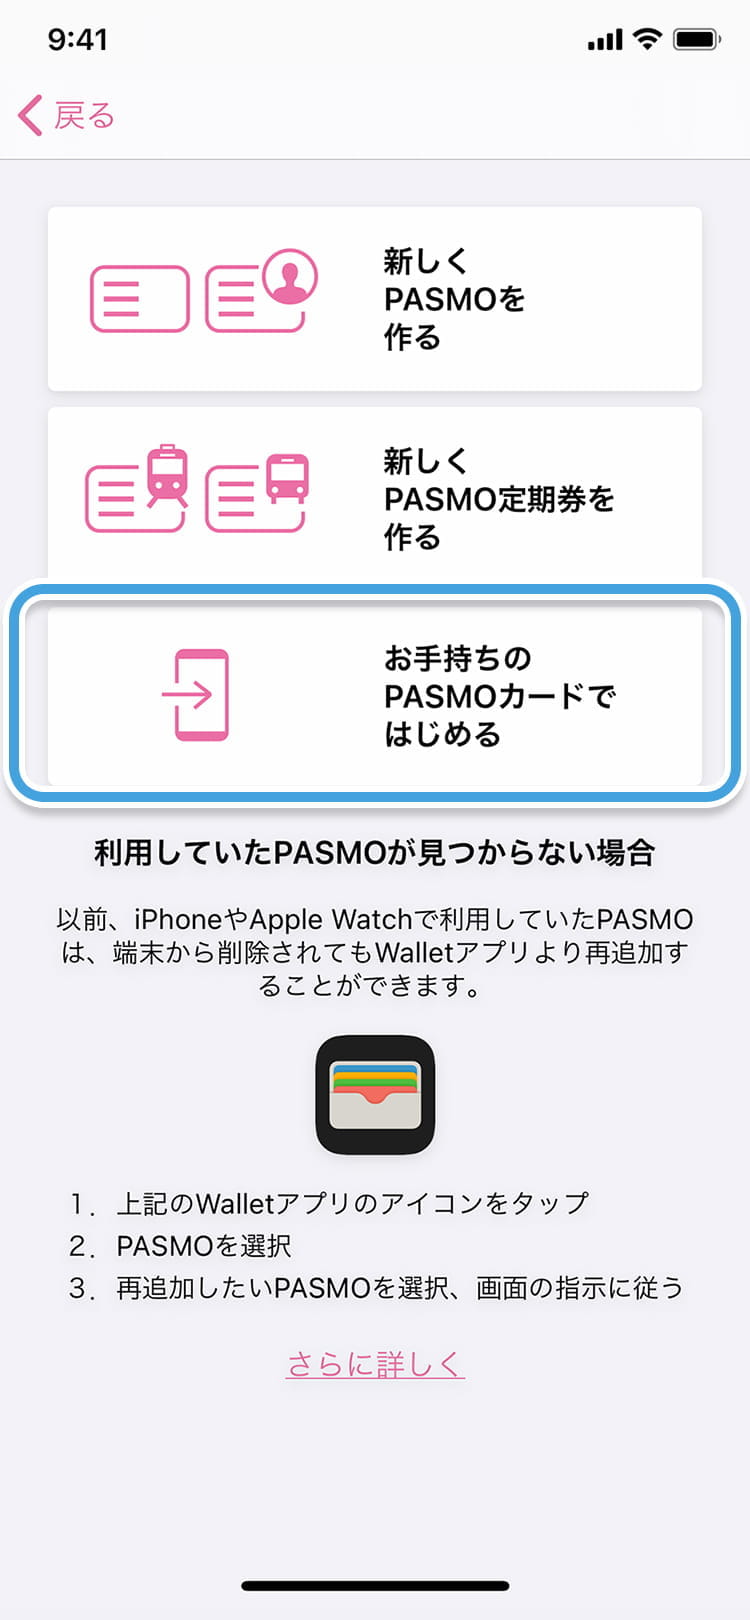 PASMOカードの移行（取り込み）｜Apple PayのPASMO